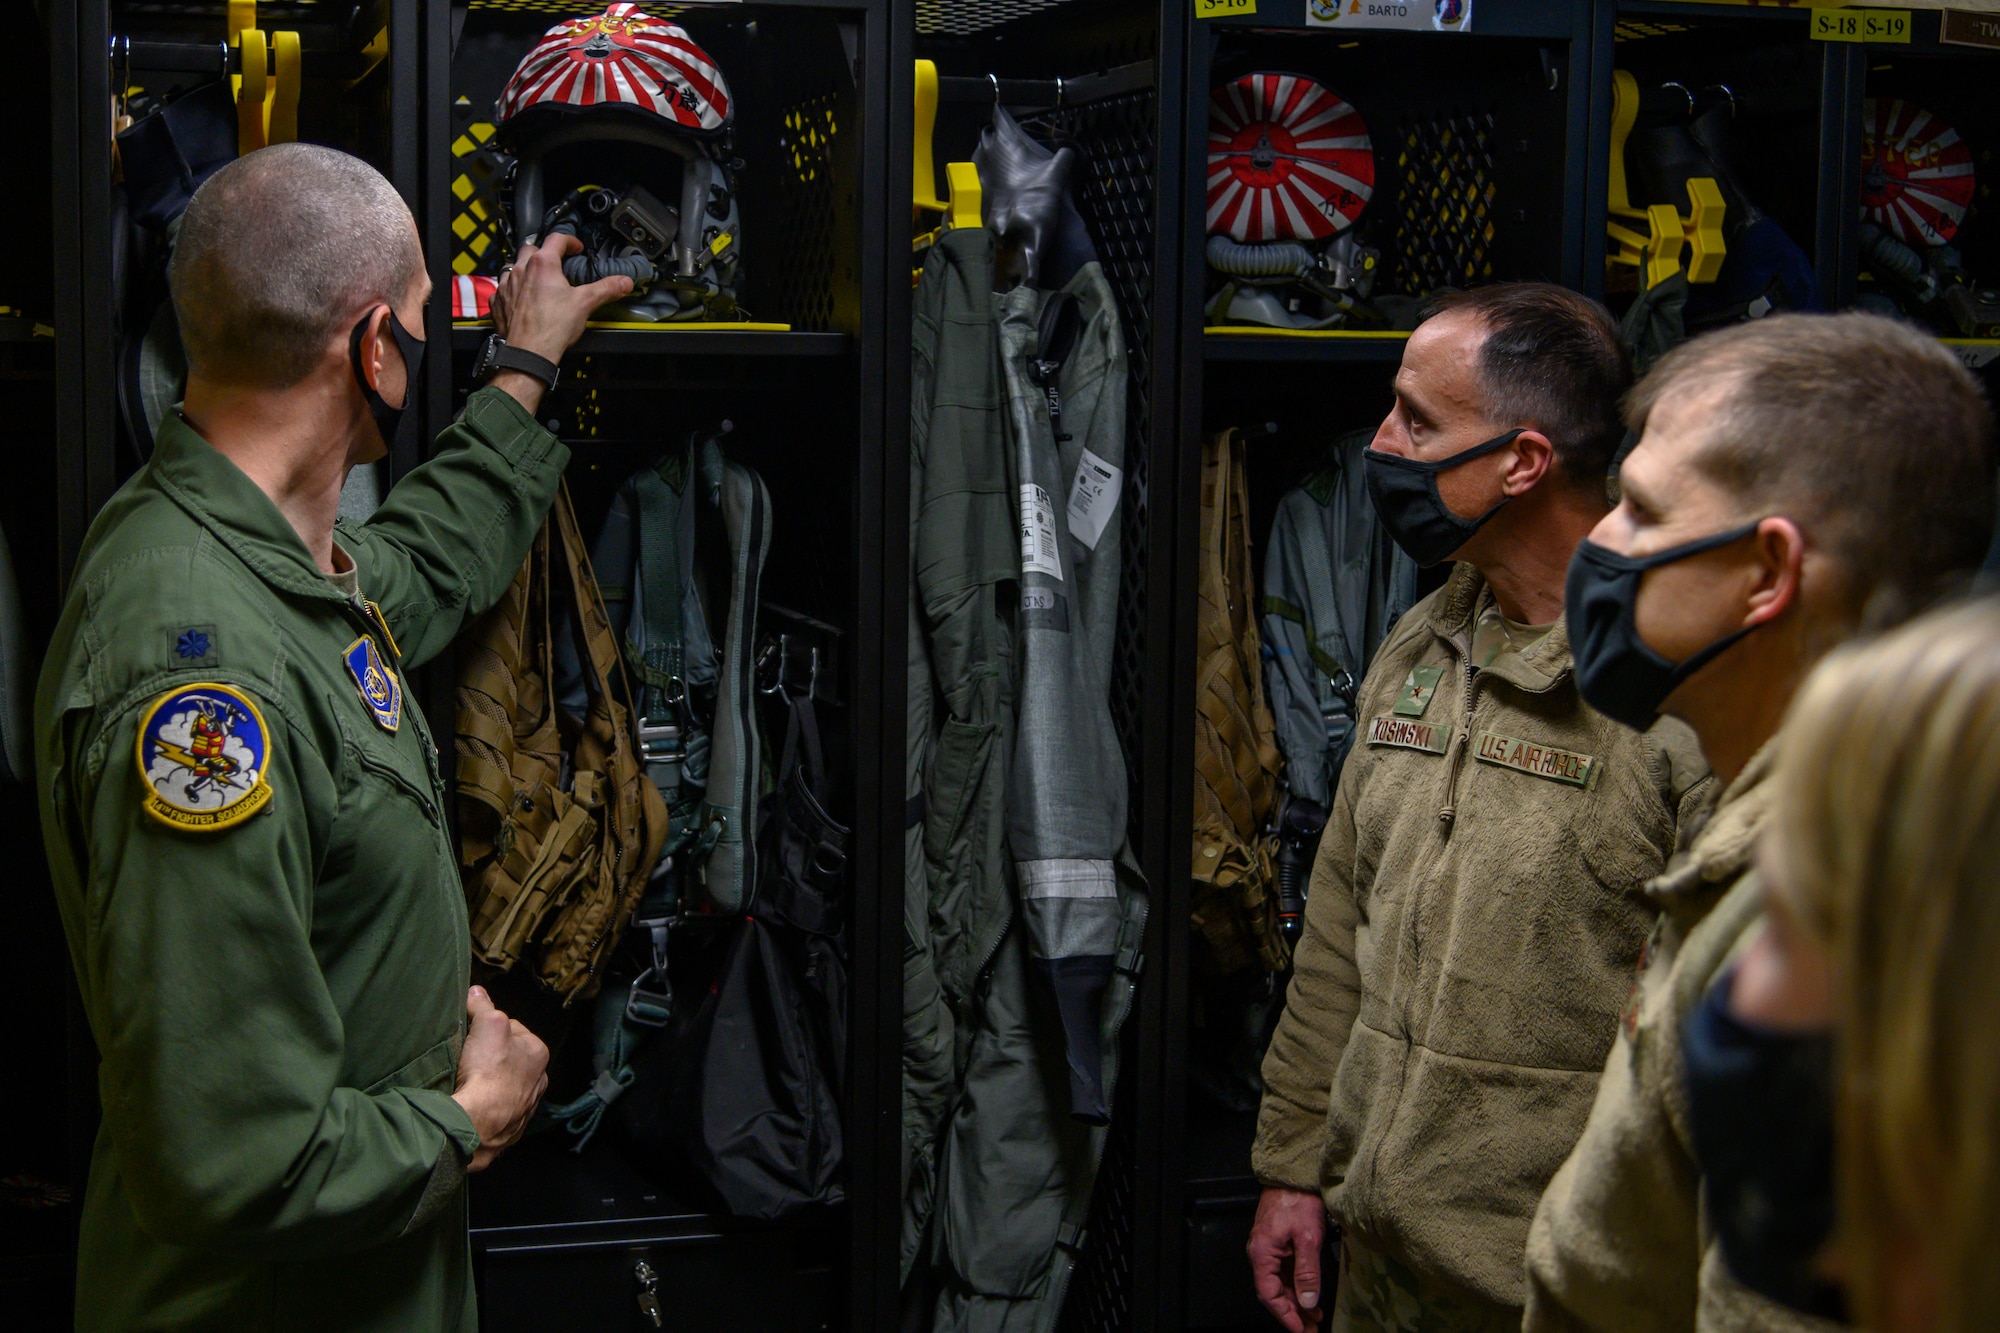 U.S. Air Force Brig. Gen. Leonard J. Kosinski, the 5th Air Force vice commander, receives a briefing on aircrew flight equipment, or AFE, at Misawa Air Base, Japan, Nov. 23, 2020. In order to carry out the mission, every plane and pilot must be equipped and ready for any situation. AFE is one of the many units that ensure the safety and success of flying missions. (U.S. Air Force photo by Airman 1st Class China M. Shock)